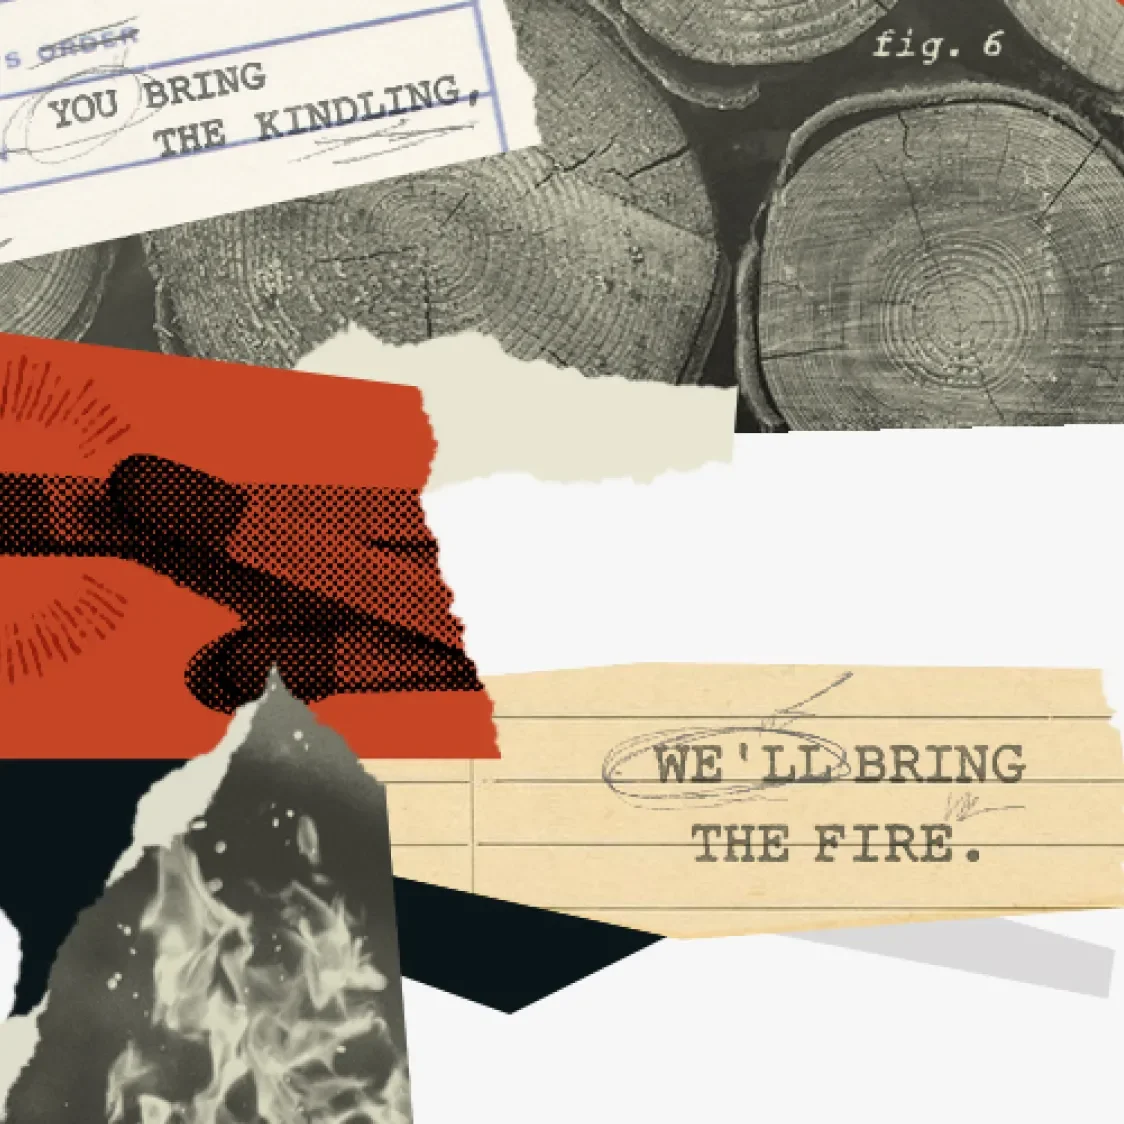 Collage of different pictures and pieces of paper, two of which complete the phrase "you bring the kindling we'll bring the fire"